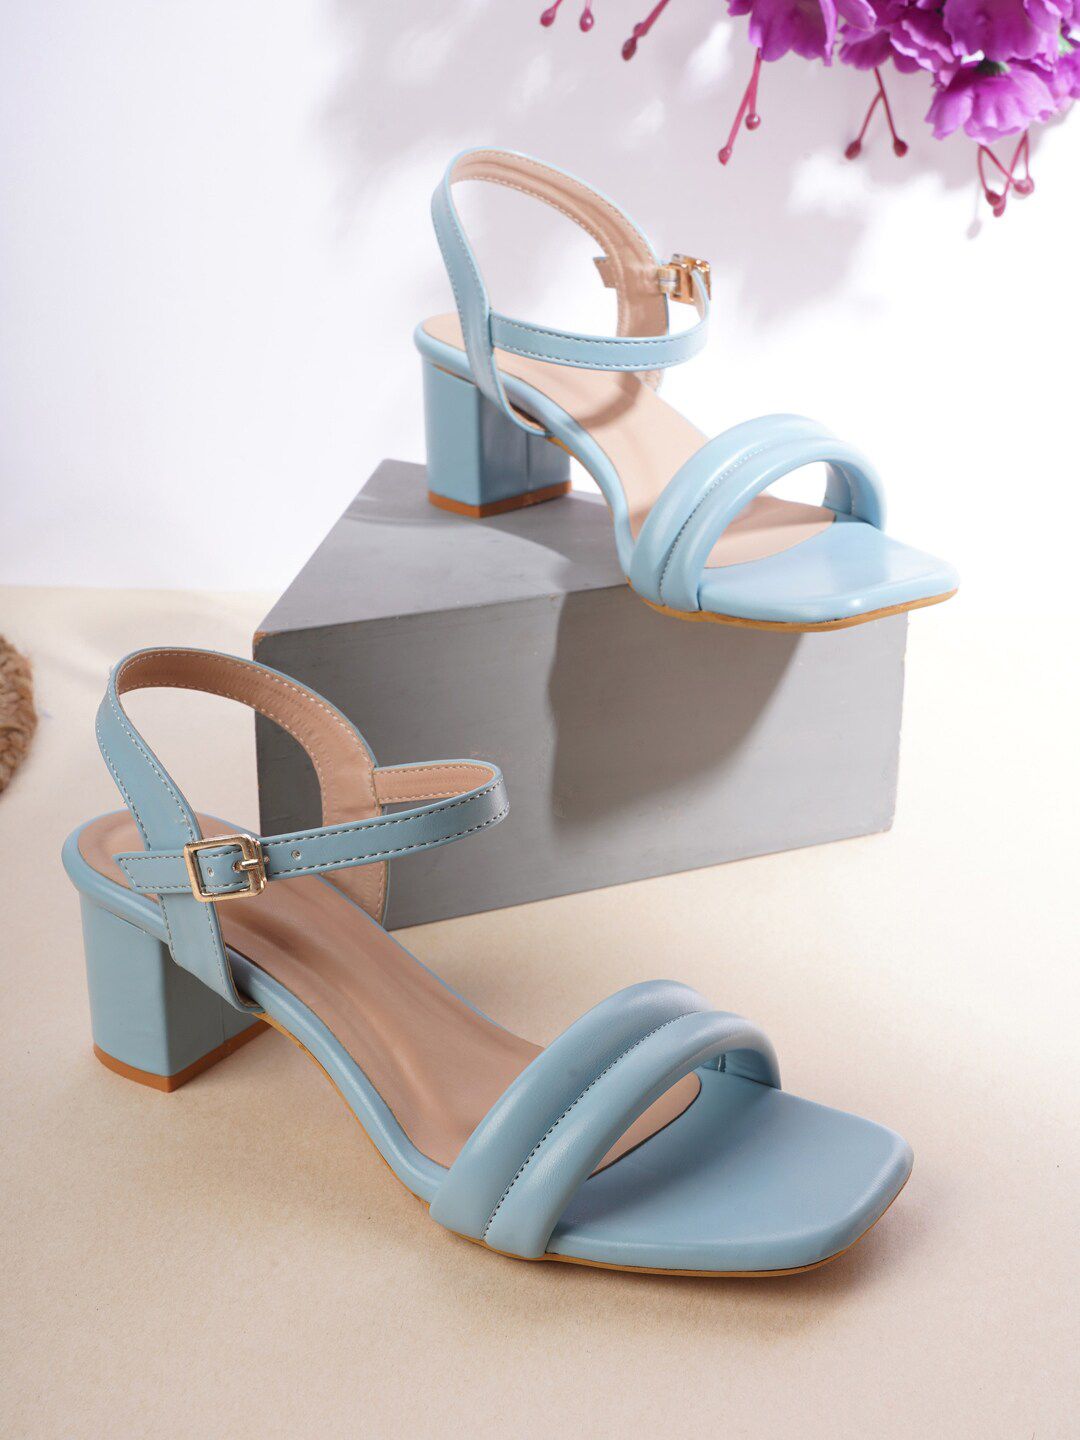 Cogner Blue Party Block Sandals with Buckles Price in India